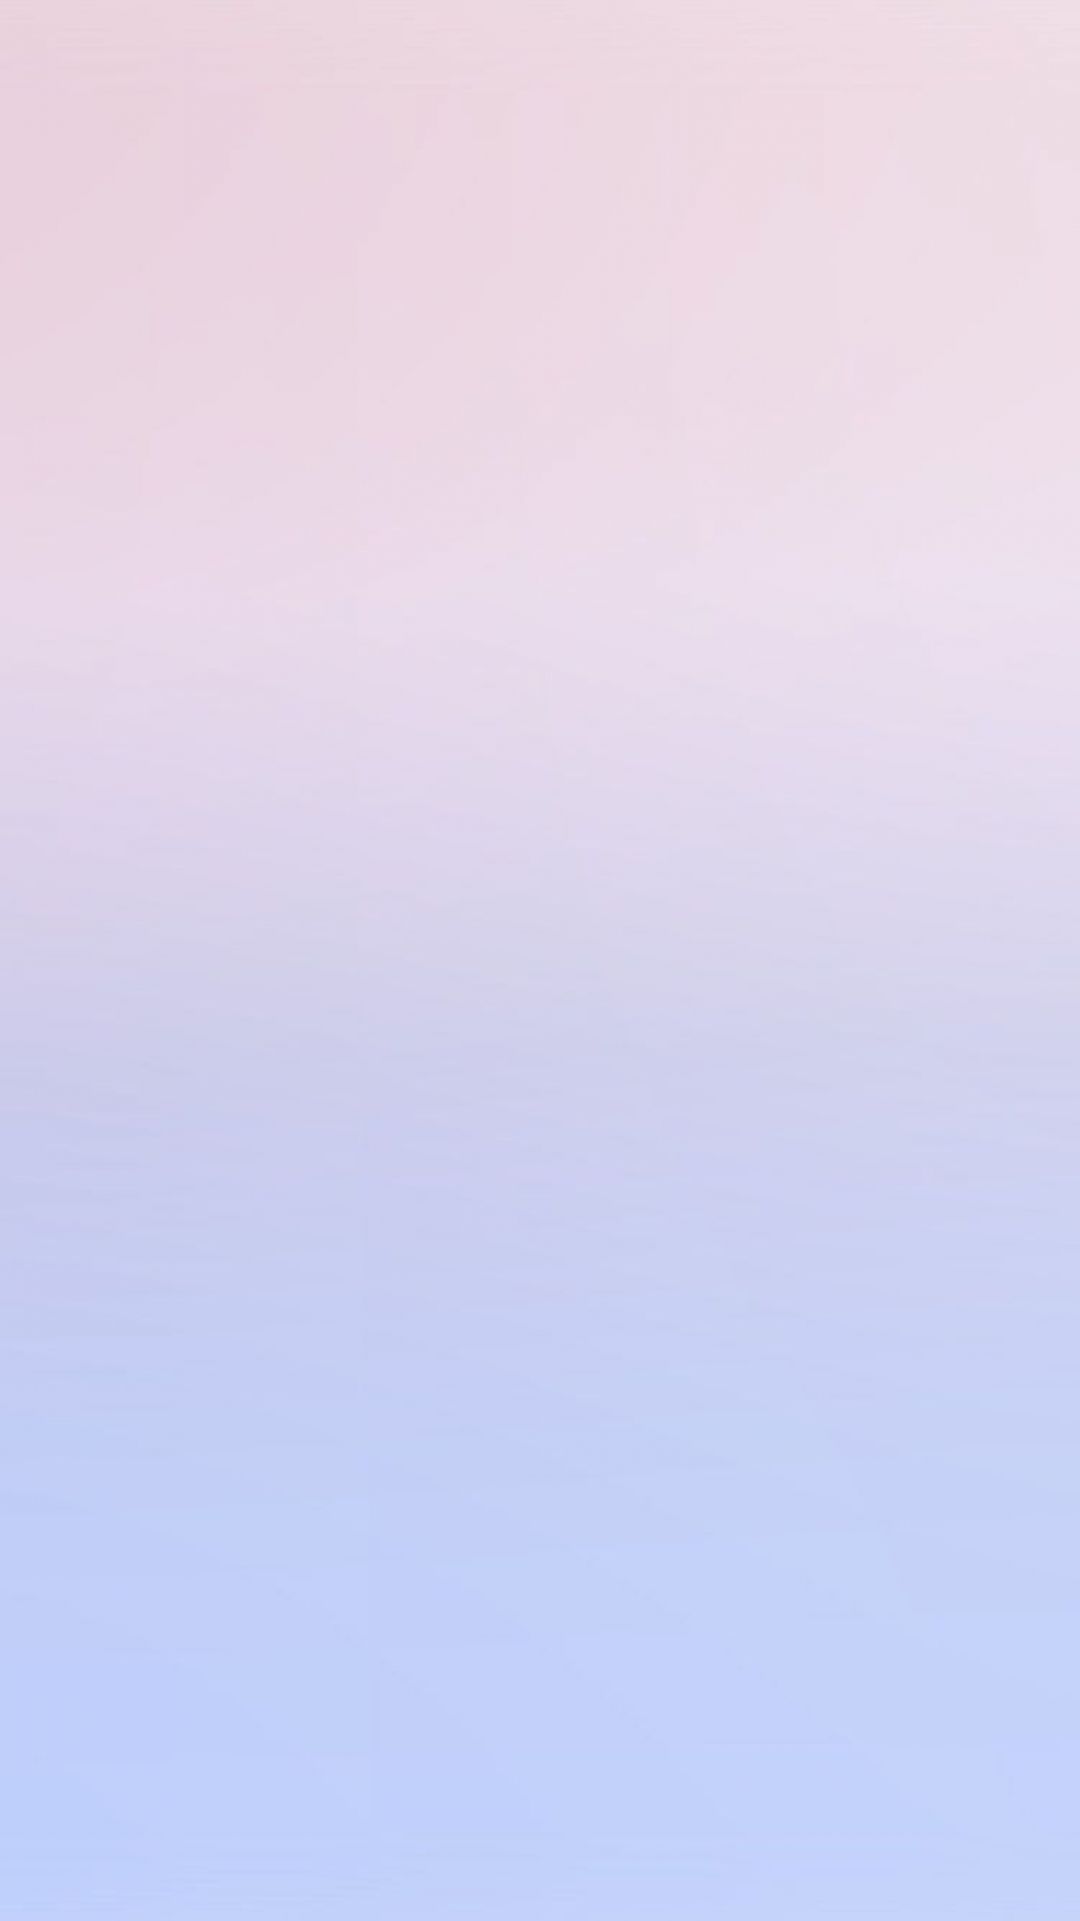 Pastel Iphone Wallpapers